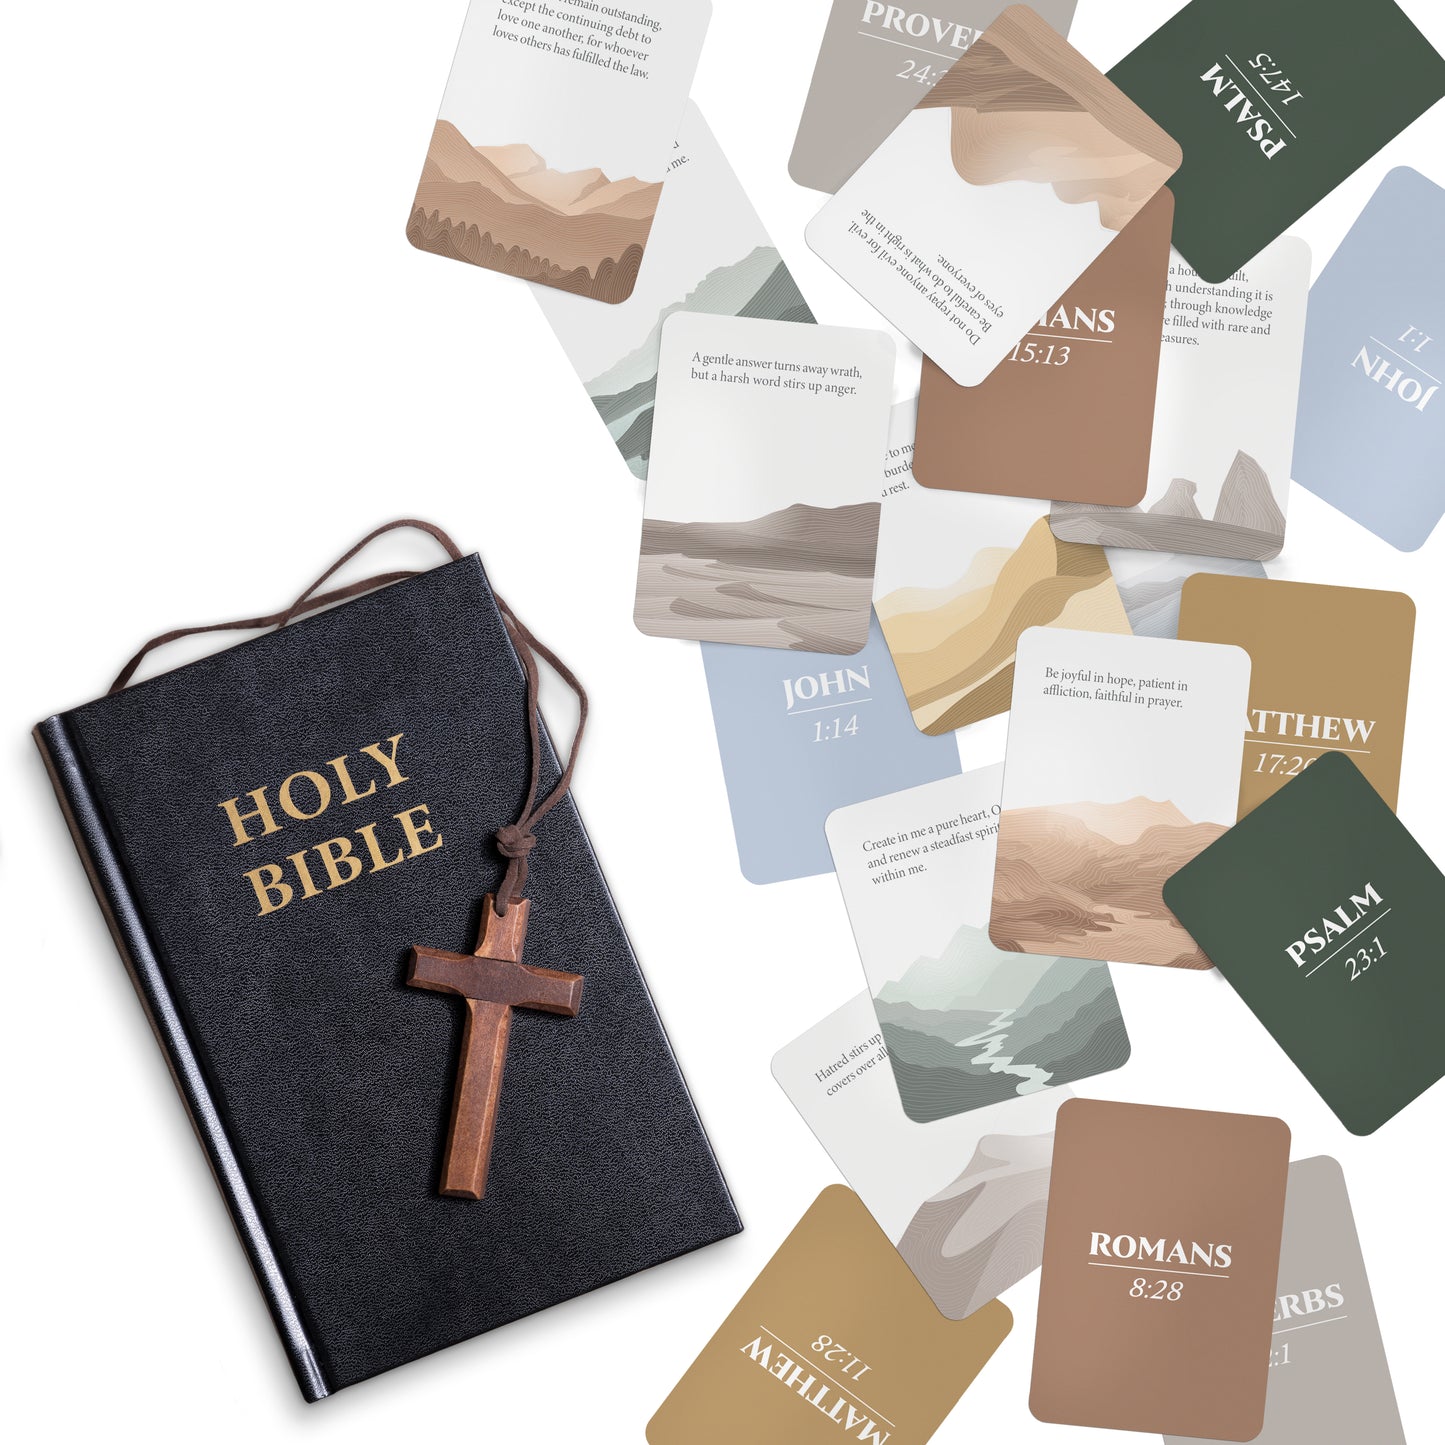 HIS GLORY - Bible Verse Cards to Inspire and Strengthen Your Faith